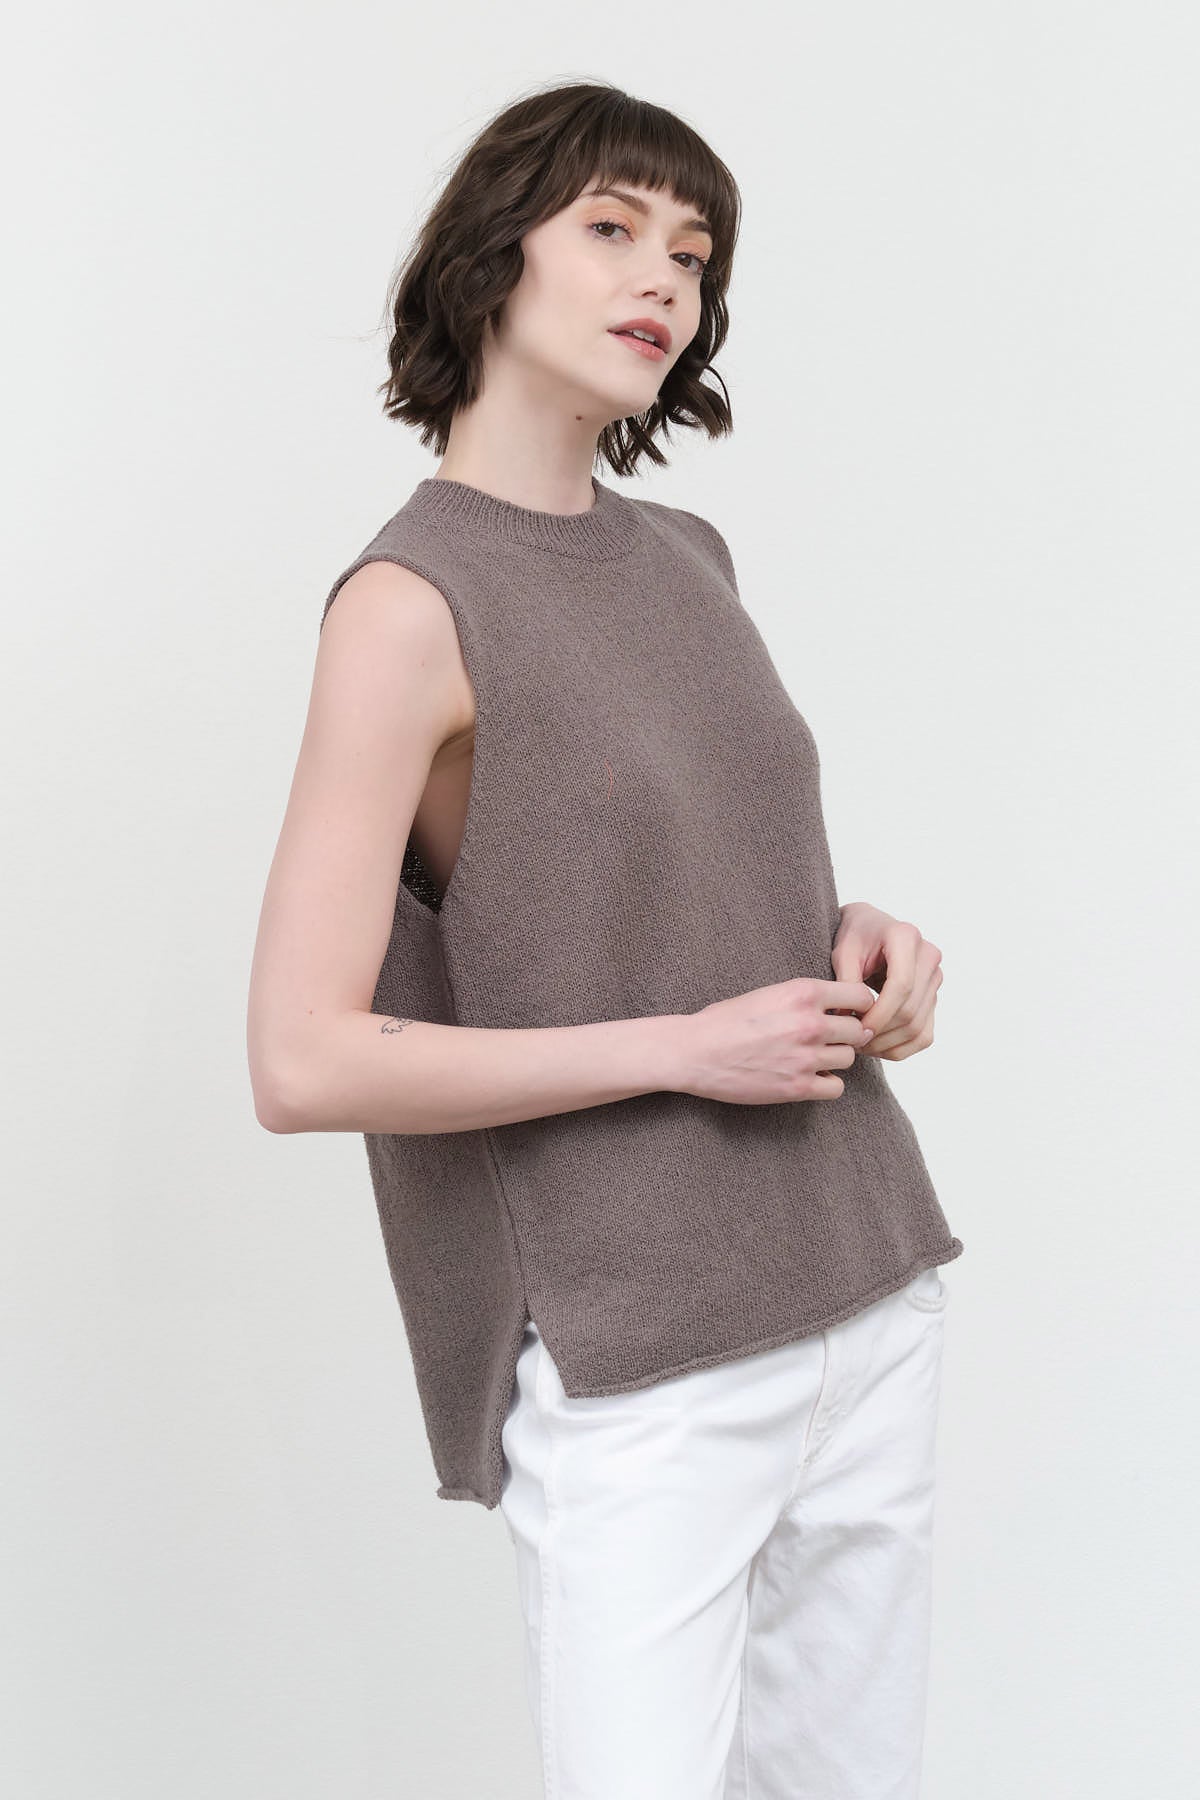 Styled Wool Lily Vest in Otter Gray